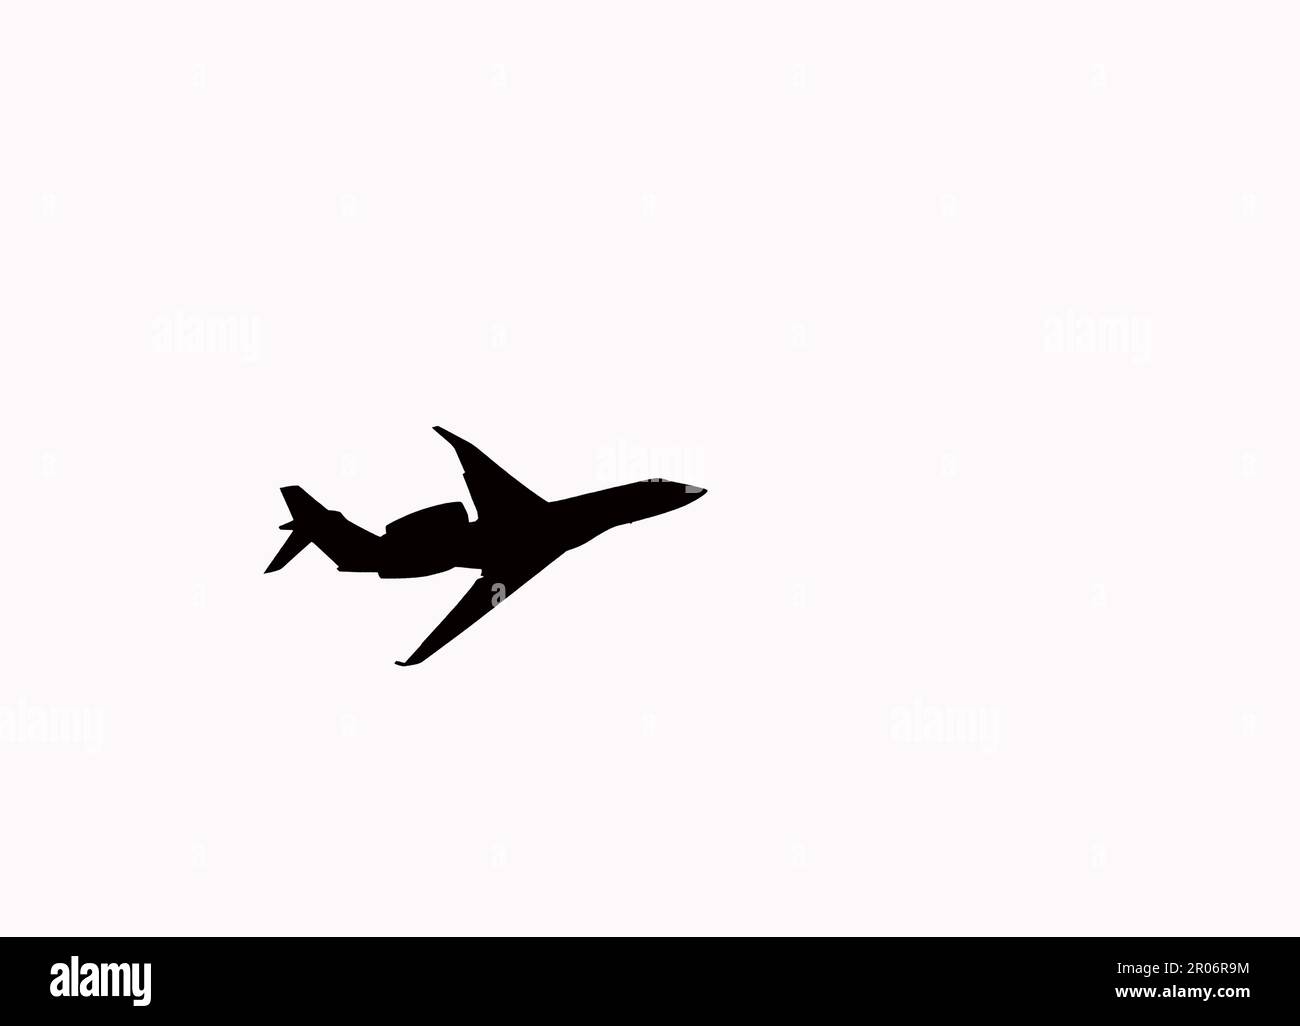 Silhouette of a private executive jet in flight isolated on a plain white background. Backgrounds. Travel concept. No people. Stock Photo